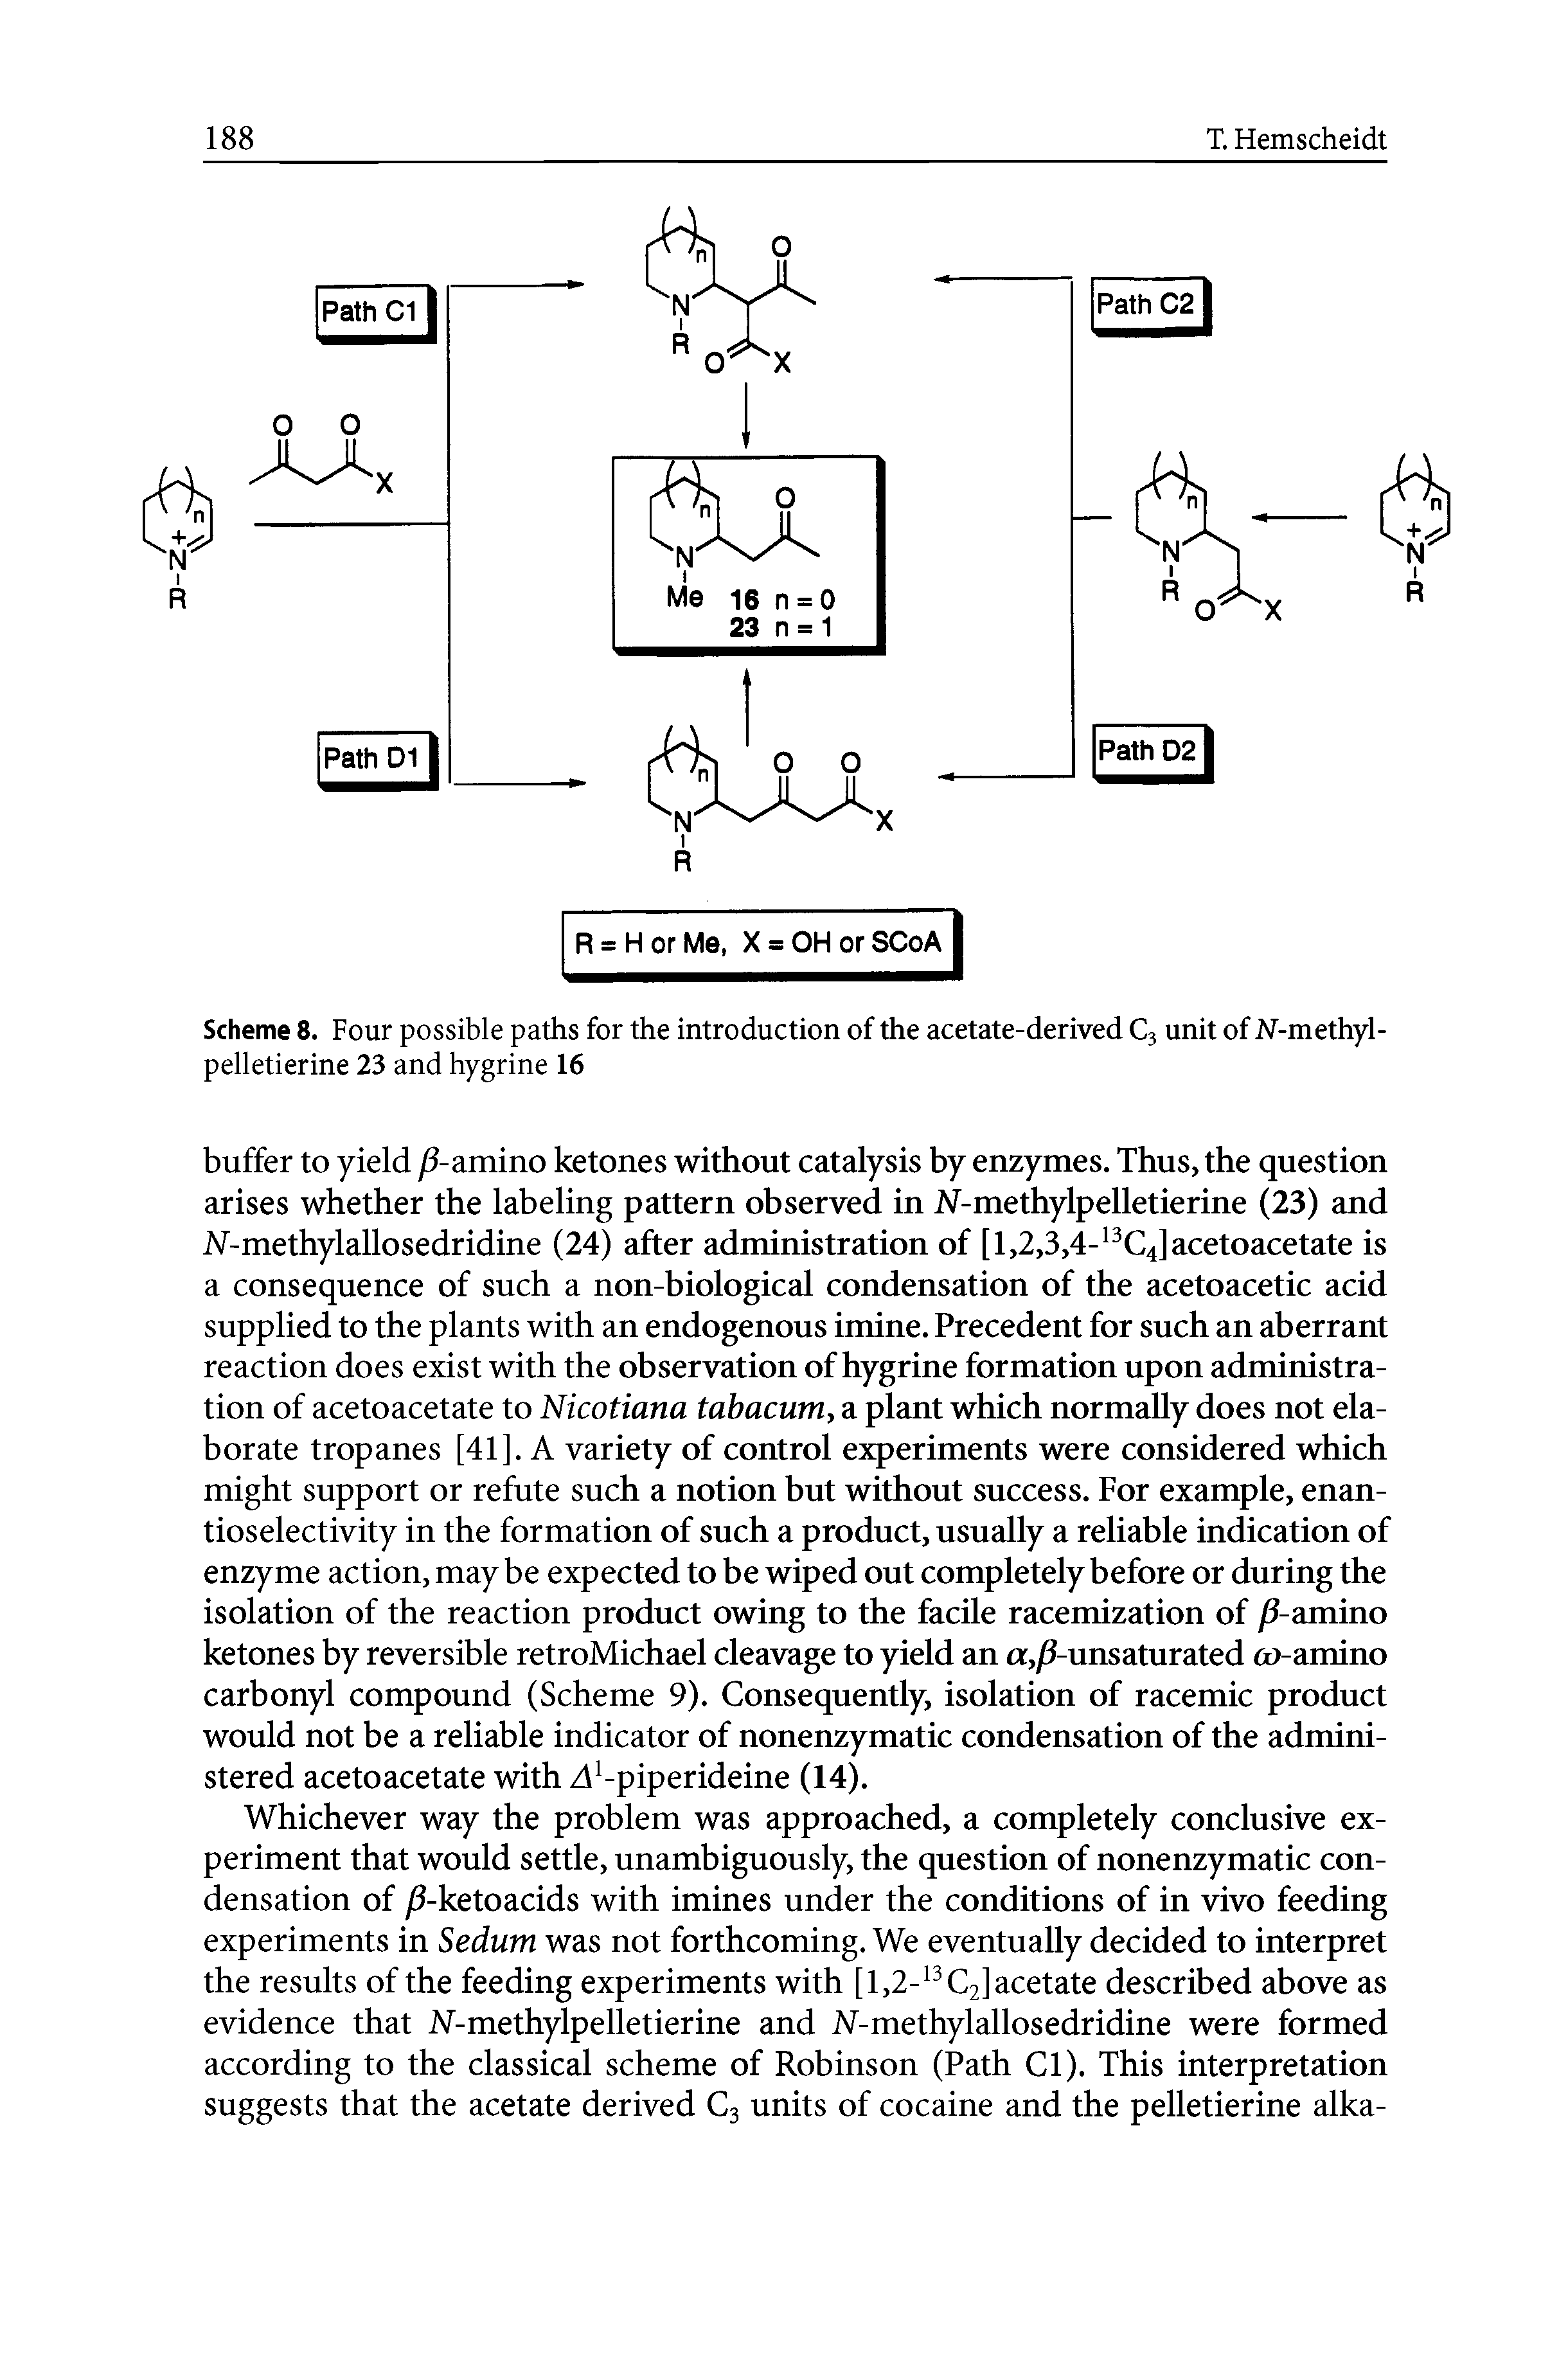 Scheme 8. Four possible paths for the introduction of the acetate-derived Cj unit of N-methyl-pelletierine 23 and hygrine 16...